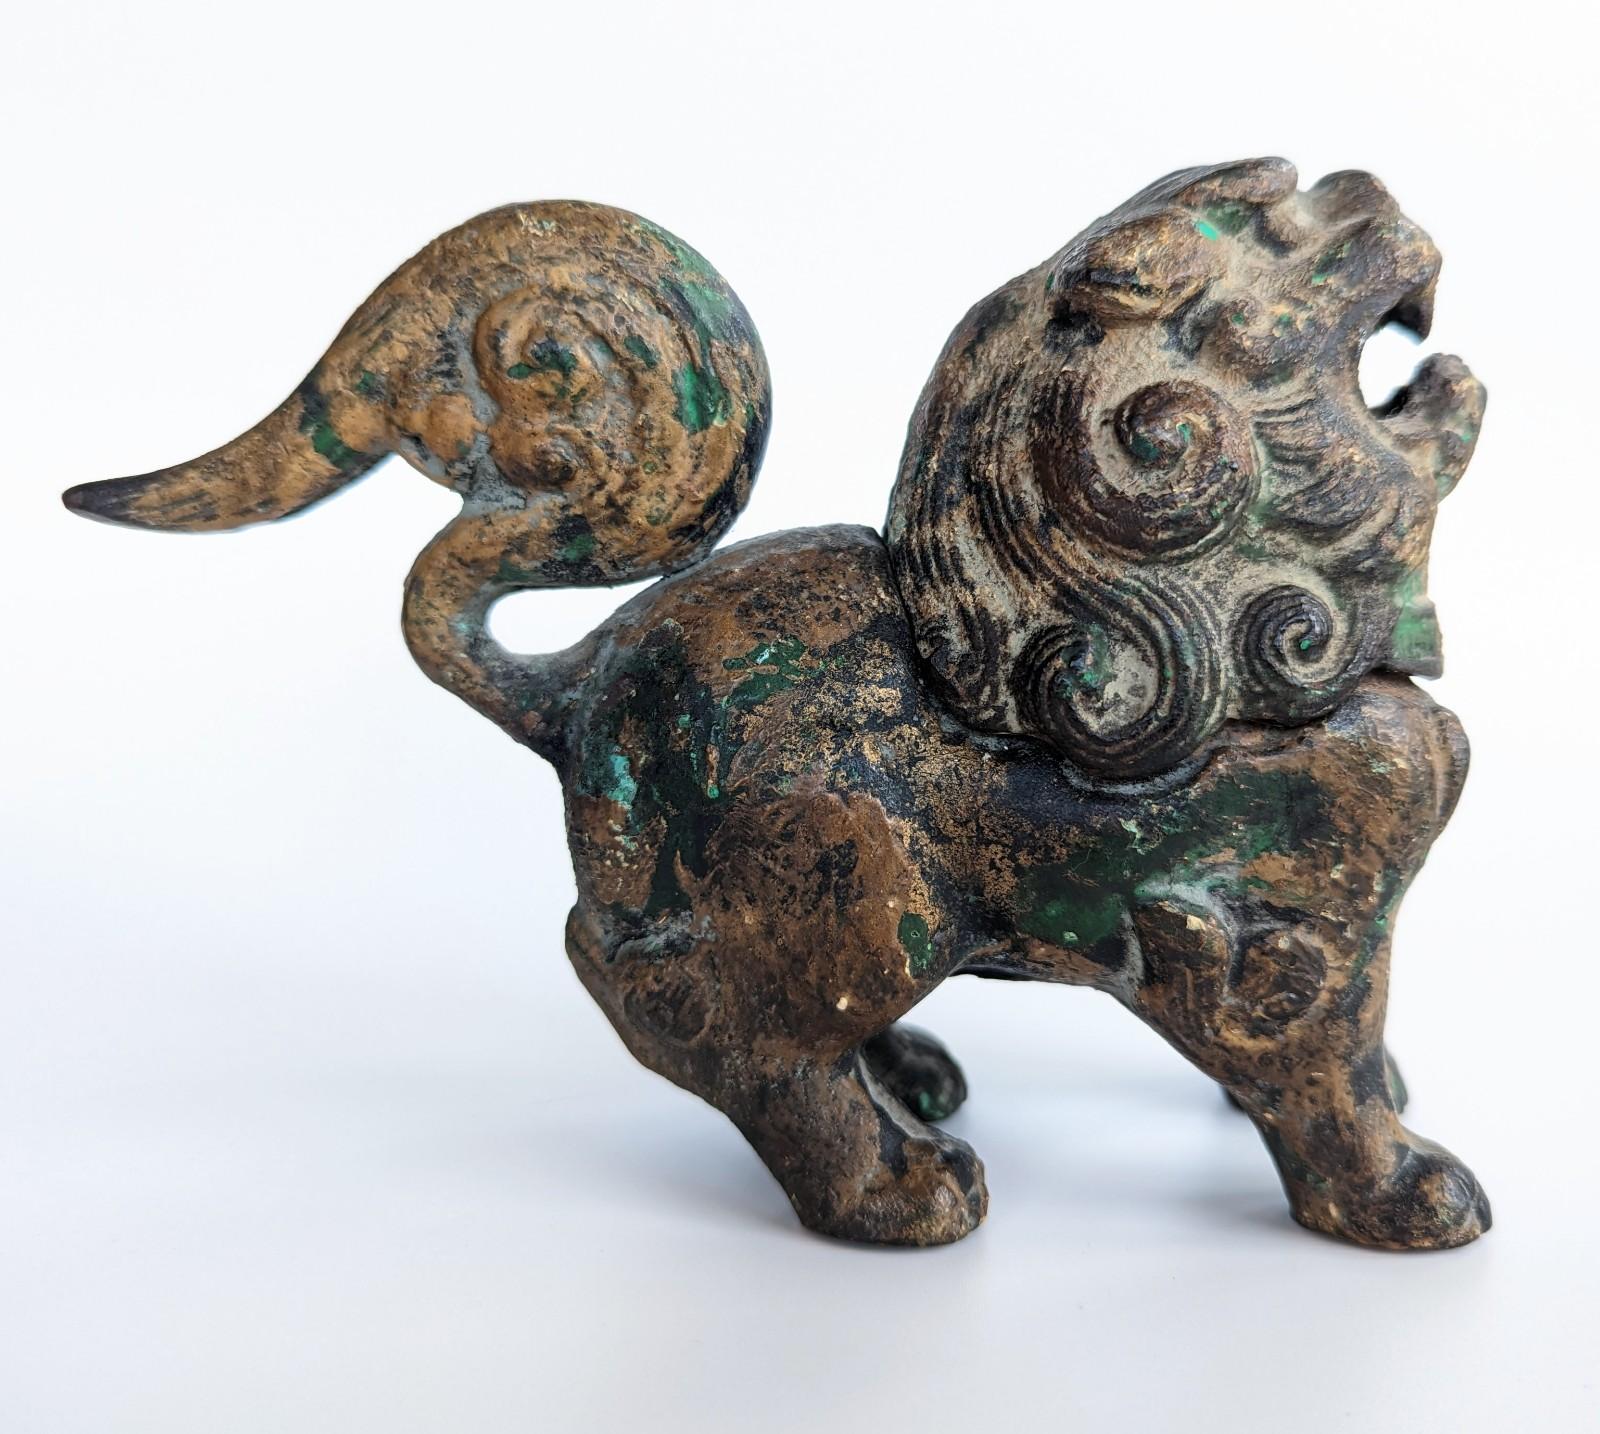 Wonderful antique patinated iron foo dog incense burner, circa early 1900s. The head is removable to load with incense.
Measures 3.75 inches in height, by 6 inches in length, by 2 inches in depth.